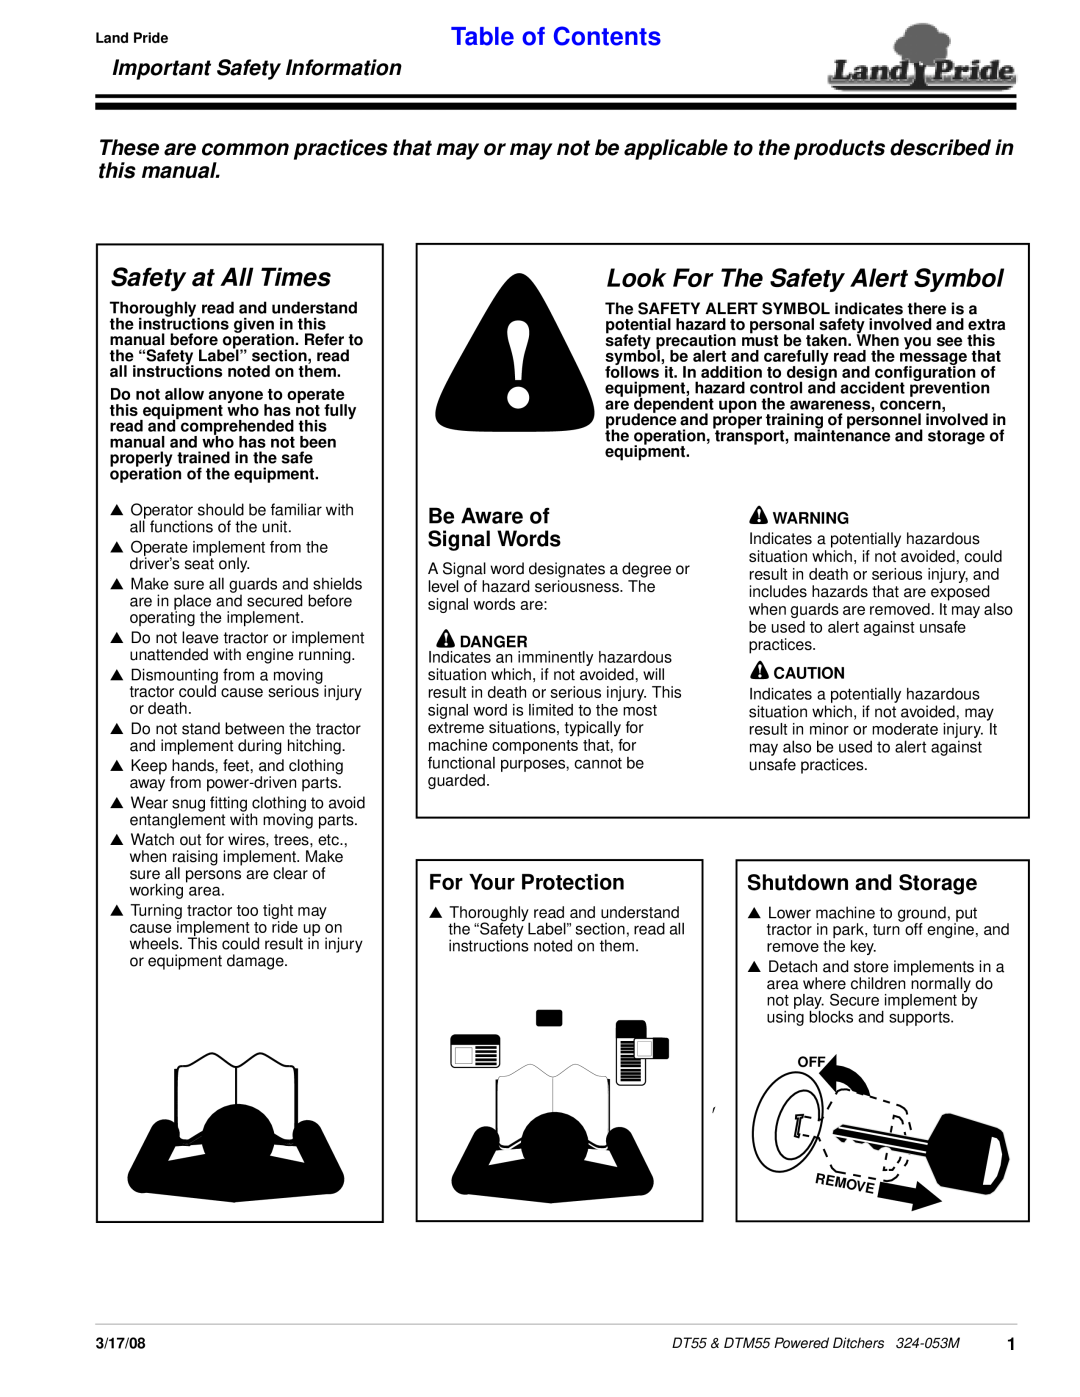 Land Pride DTM55 Safety at All Times, Look For The Safety Alert Symbol, Important Safety Information, Table of Contents 